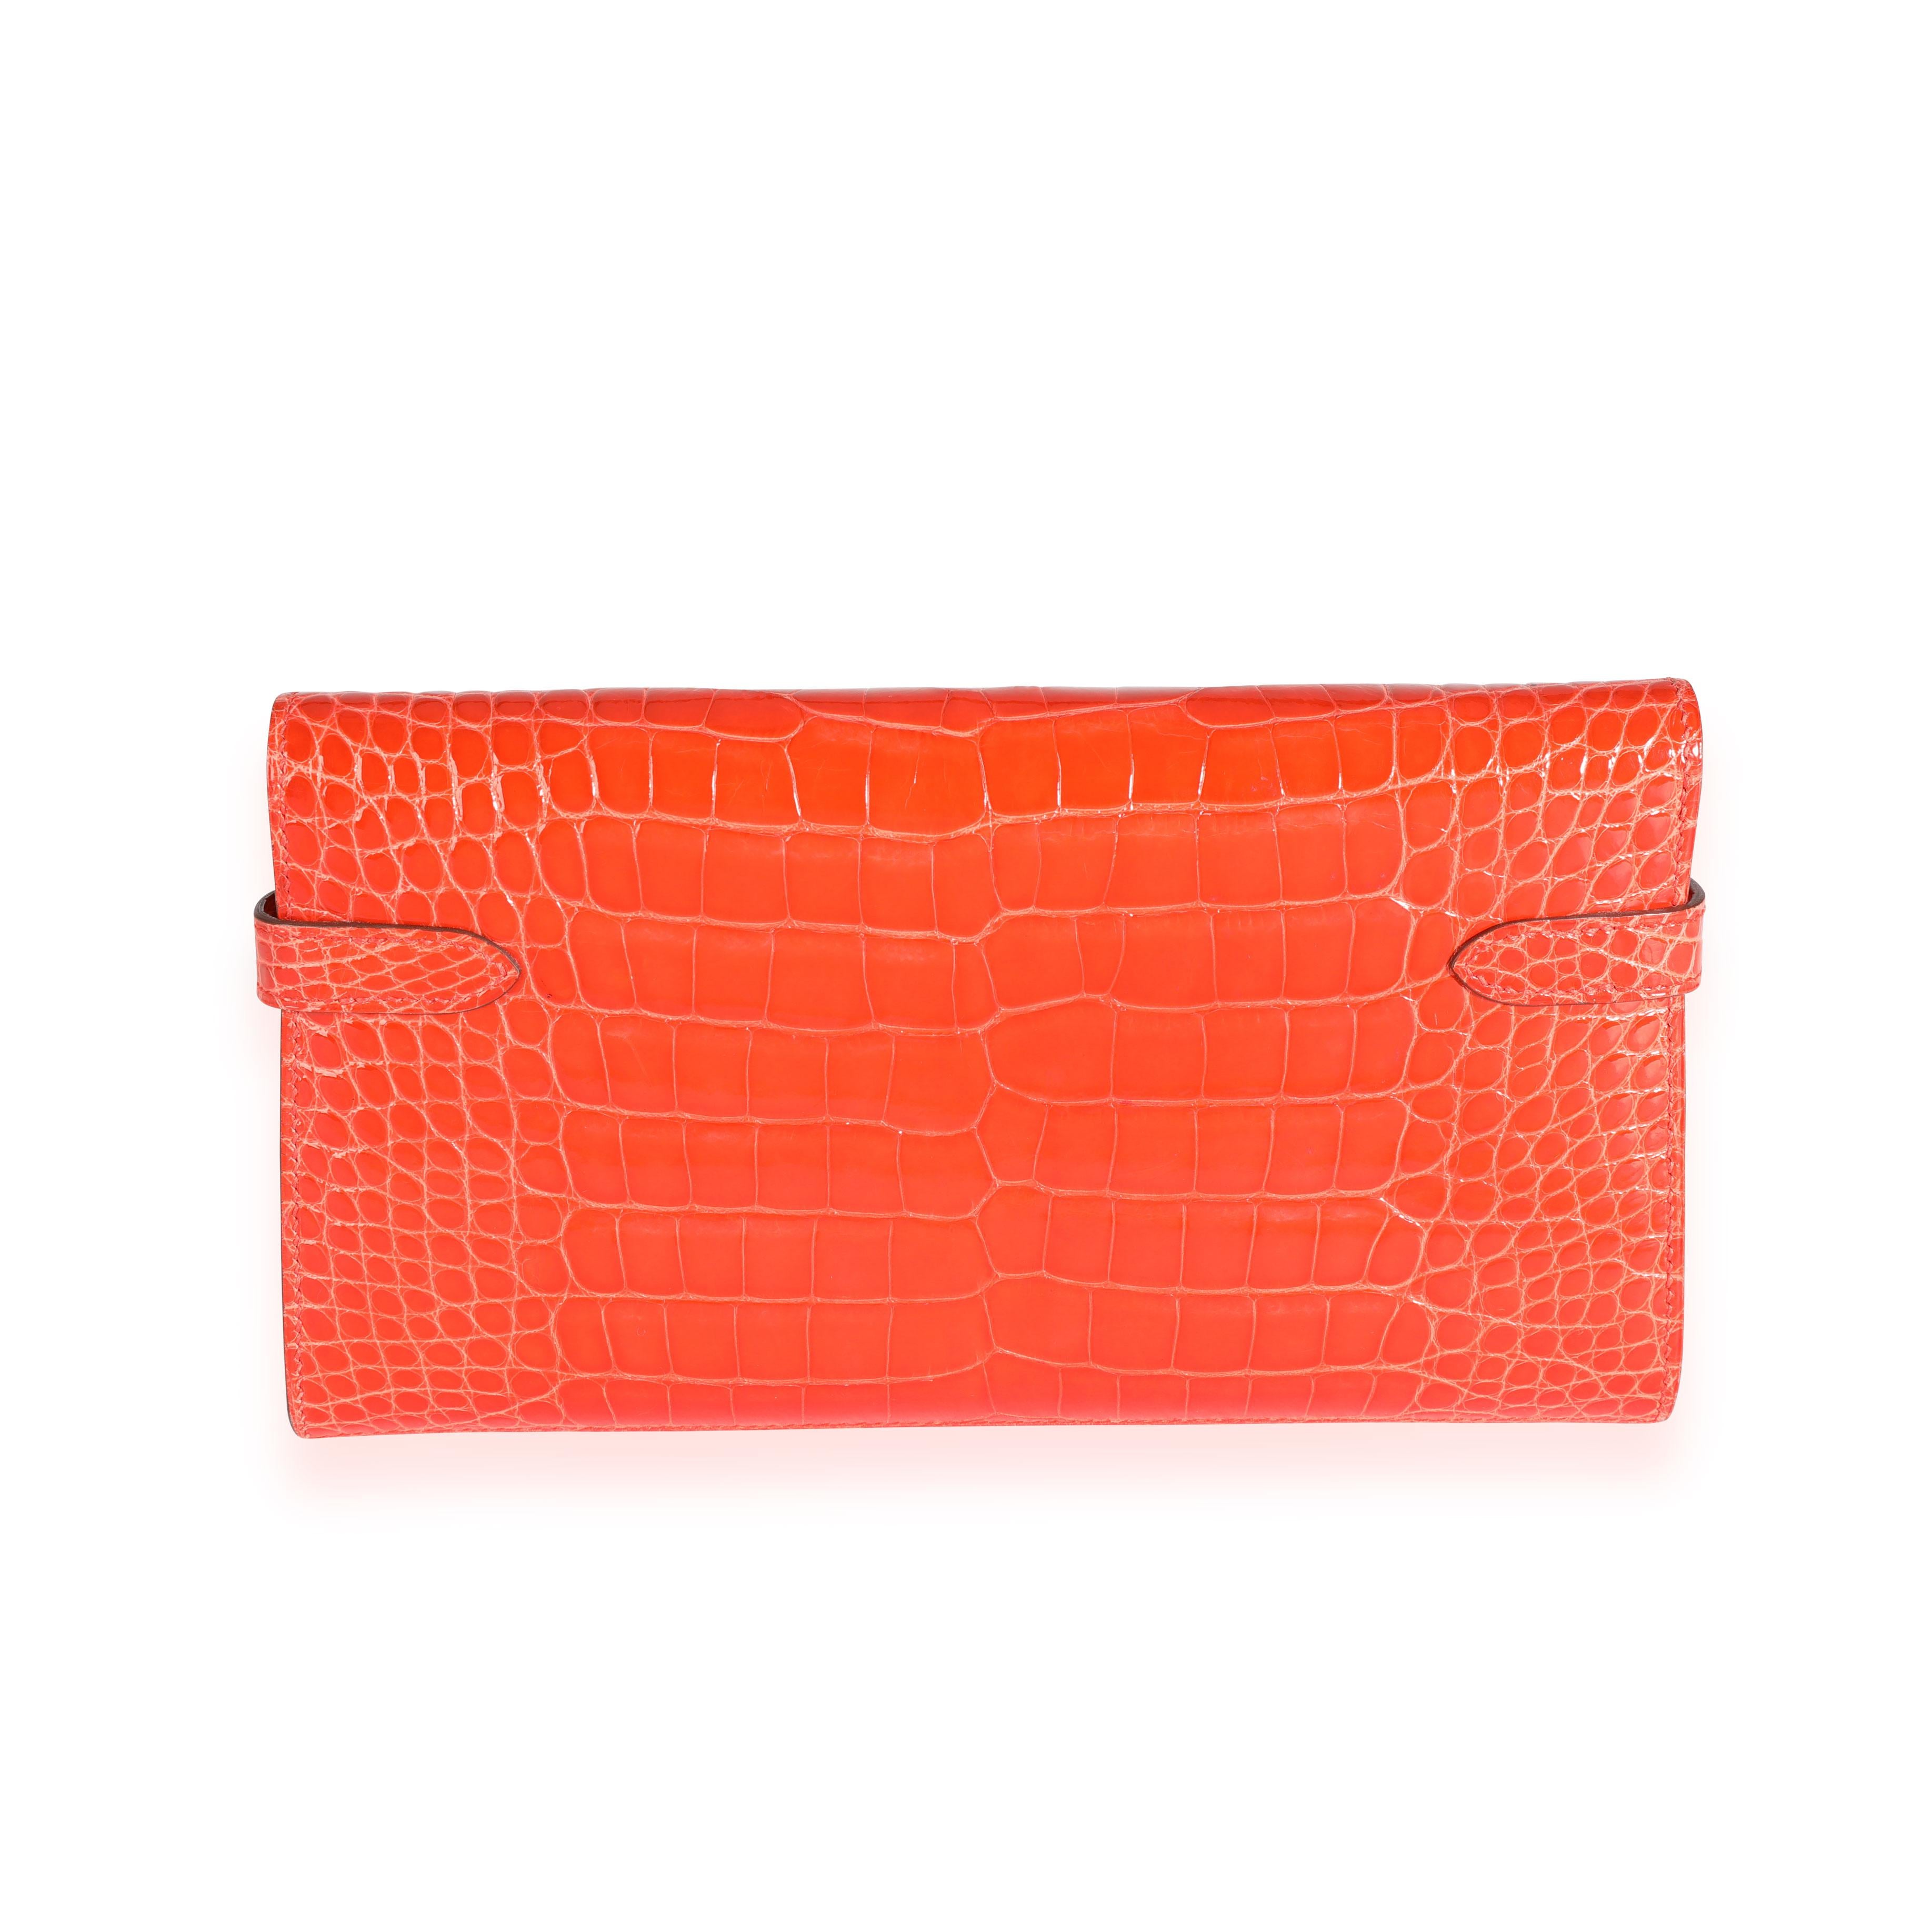 Listing Title: Hermès Tangerine Shiny Alligator Classic Kelly Wallet GHW
SKU: 111840
MSRP: 14800.00
Condition: Pre-owned (3000)
Handbag Condition: Very Good
Condition Comments: Very Good Condition. Scratching to hardware. Please note: this item can